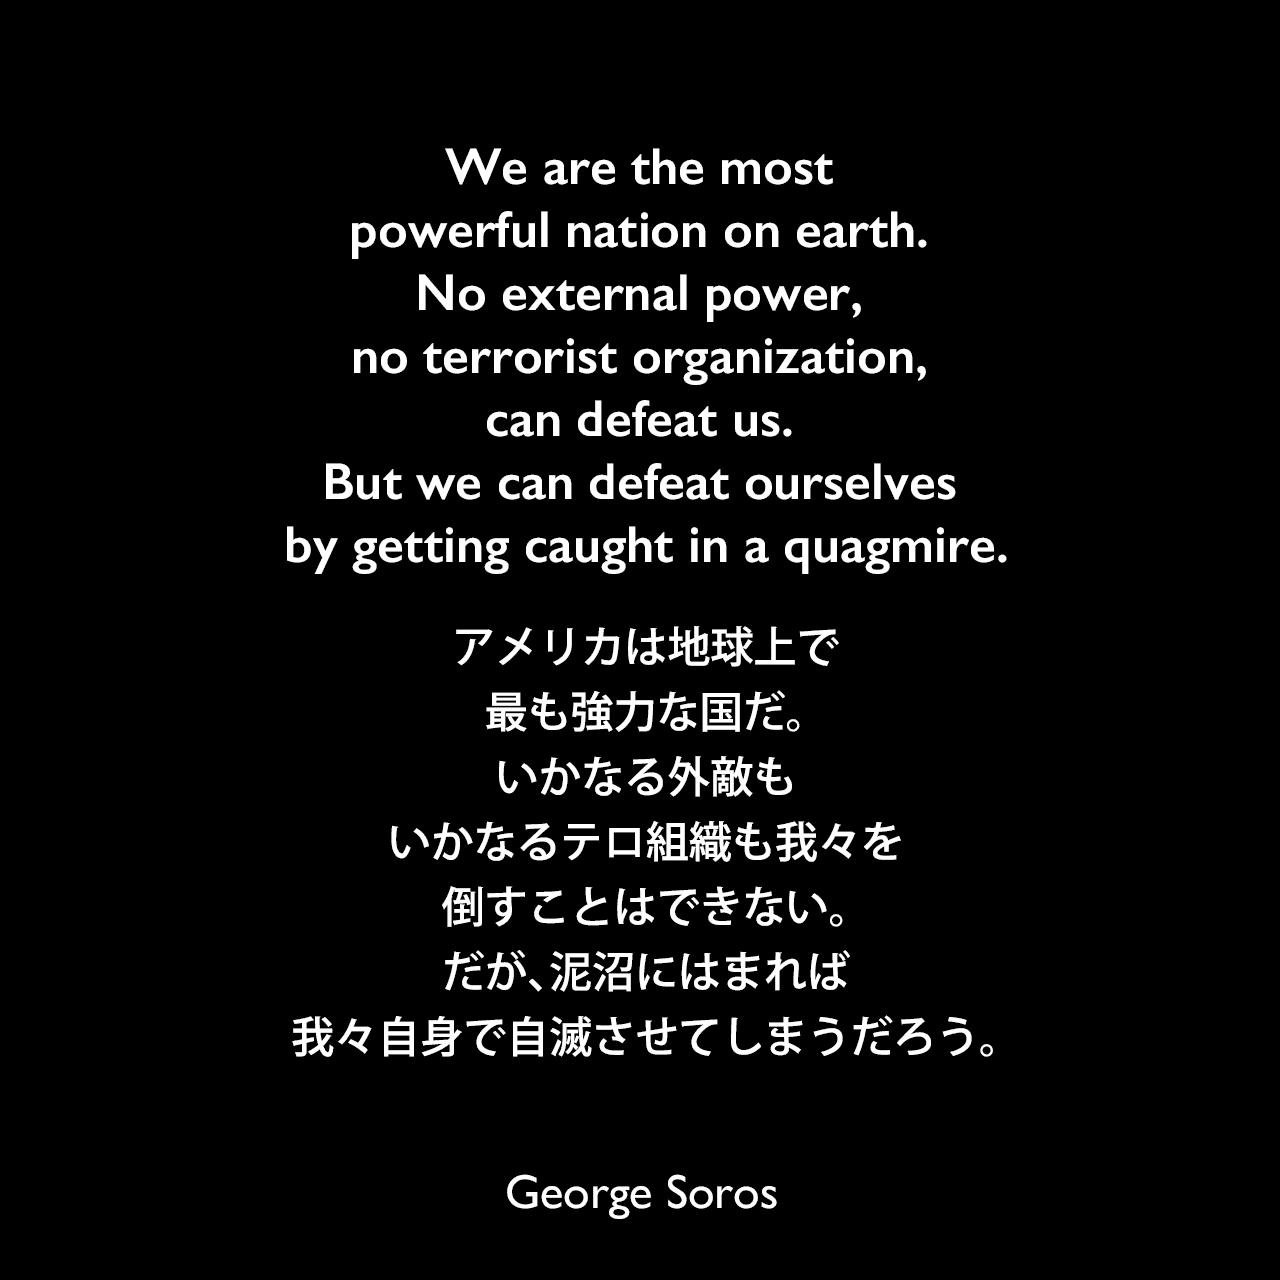 We are the most powerful nation on earth. No external power, no terrorist organization, can defeat us. But we can defeat ourselves by getting caught in a quagmire.アメリカは地球上で最も強力な国だ。いかなる外敵もいかなるテロ組織も我々を倒すことはできない。だが、泥沼にはまれば我々自身で自滅させてしまうだろう。George Soros